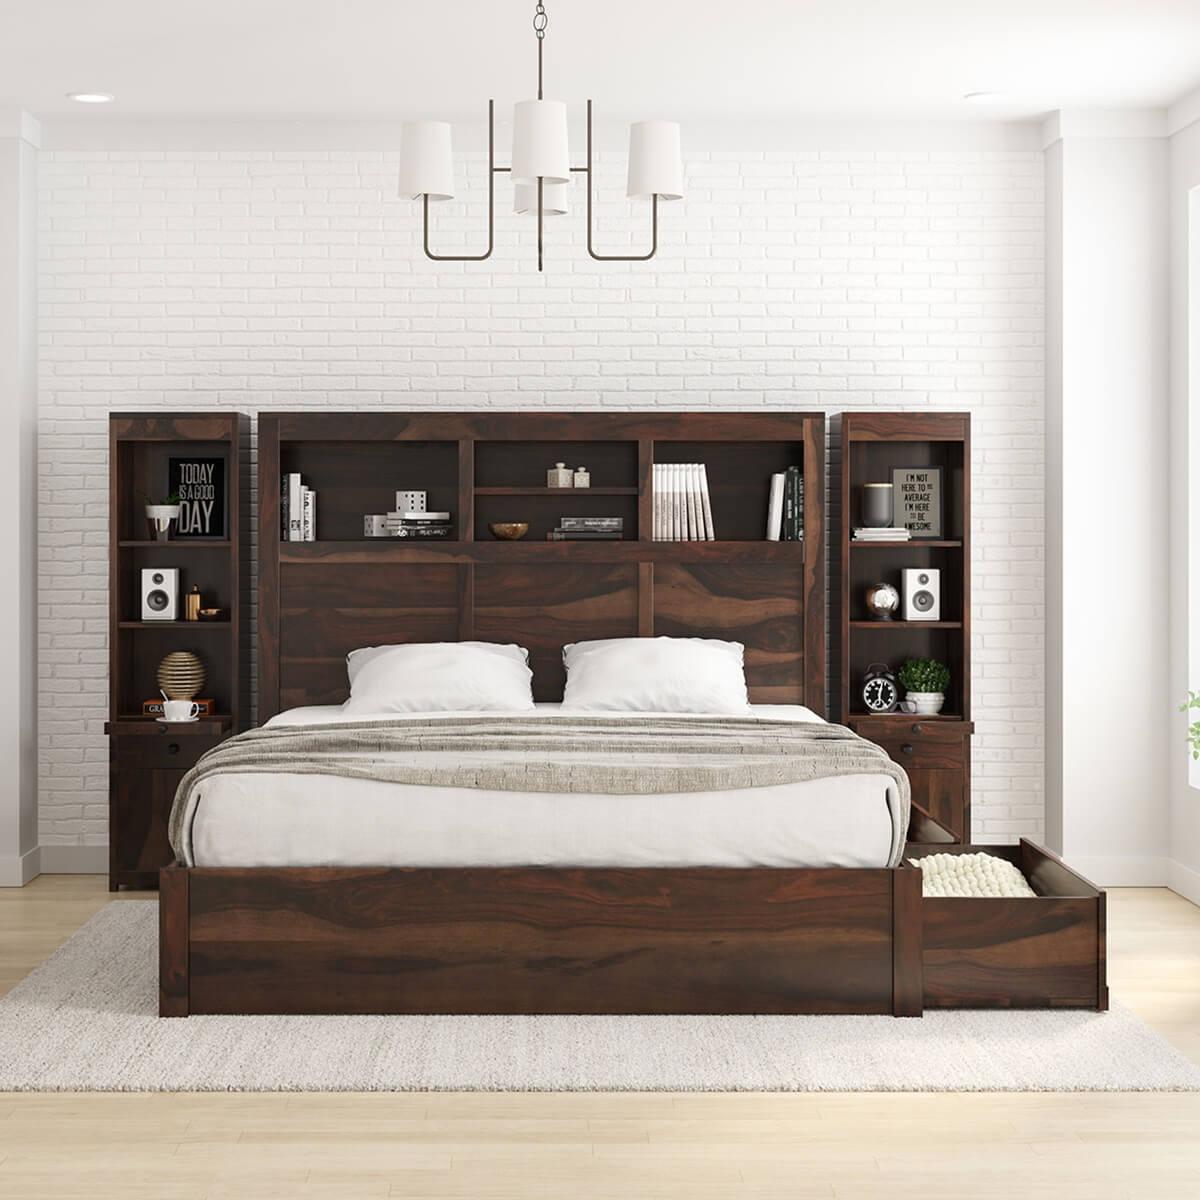 How To Attach A Headboard Any Bed, Can You Attach A Wood Headboard To Metal Frame